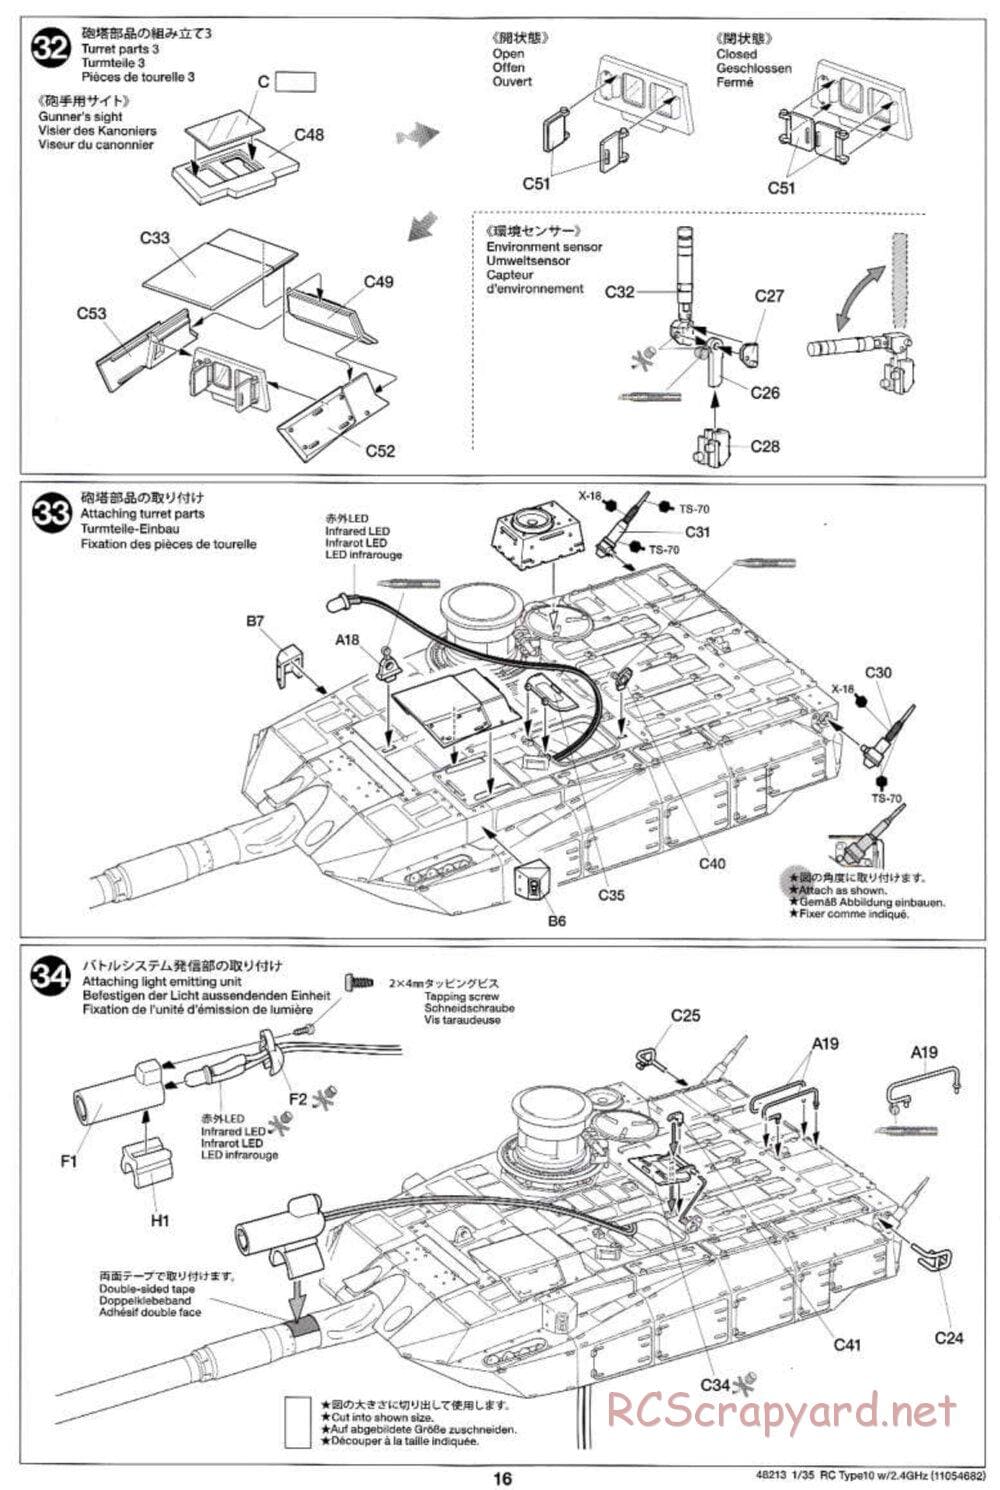 Tamiya - JGSDF Type 10 Tank - 1/35 Scale Chassis - Manual - Page 16